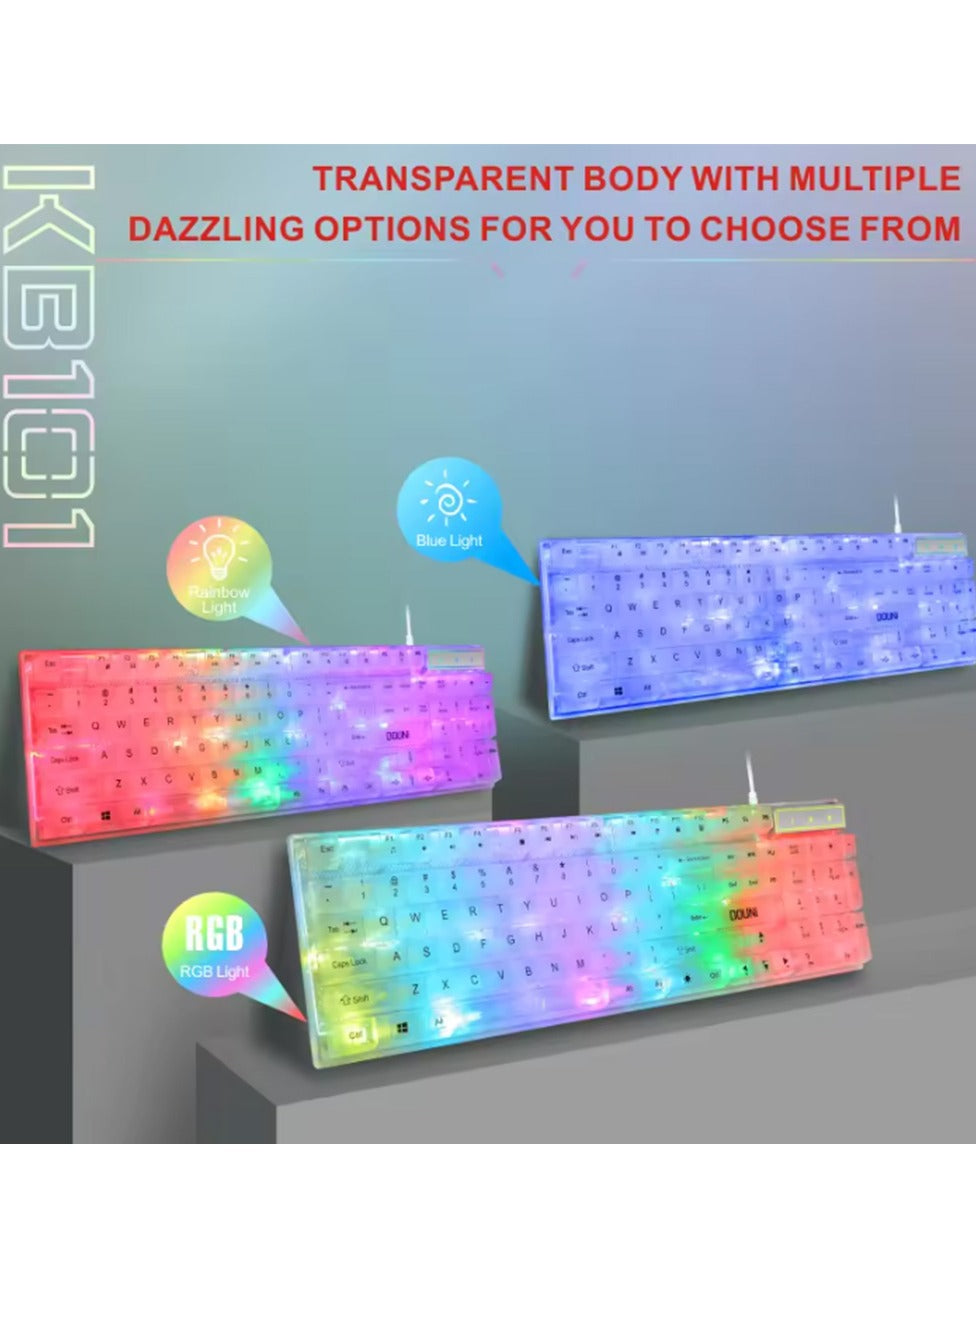 Douni KB101 Colorful Glow RGB Transparent Keyboard Mechanical Touch